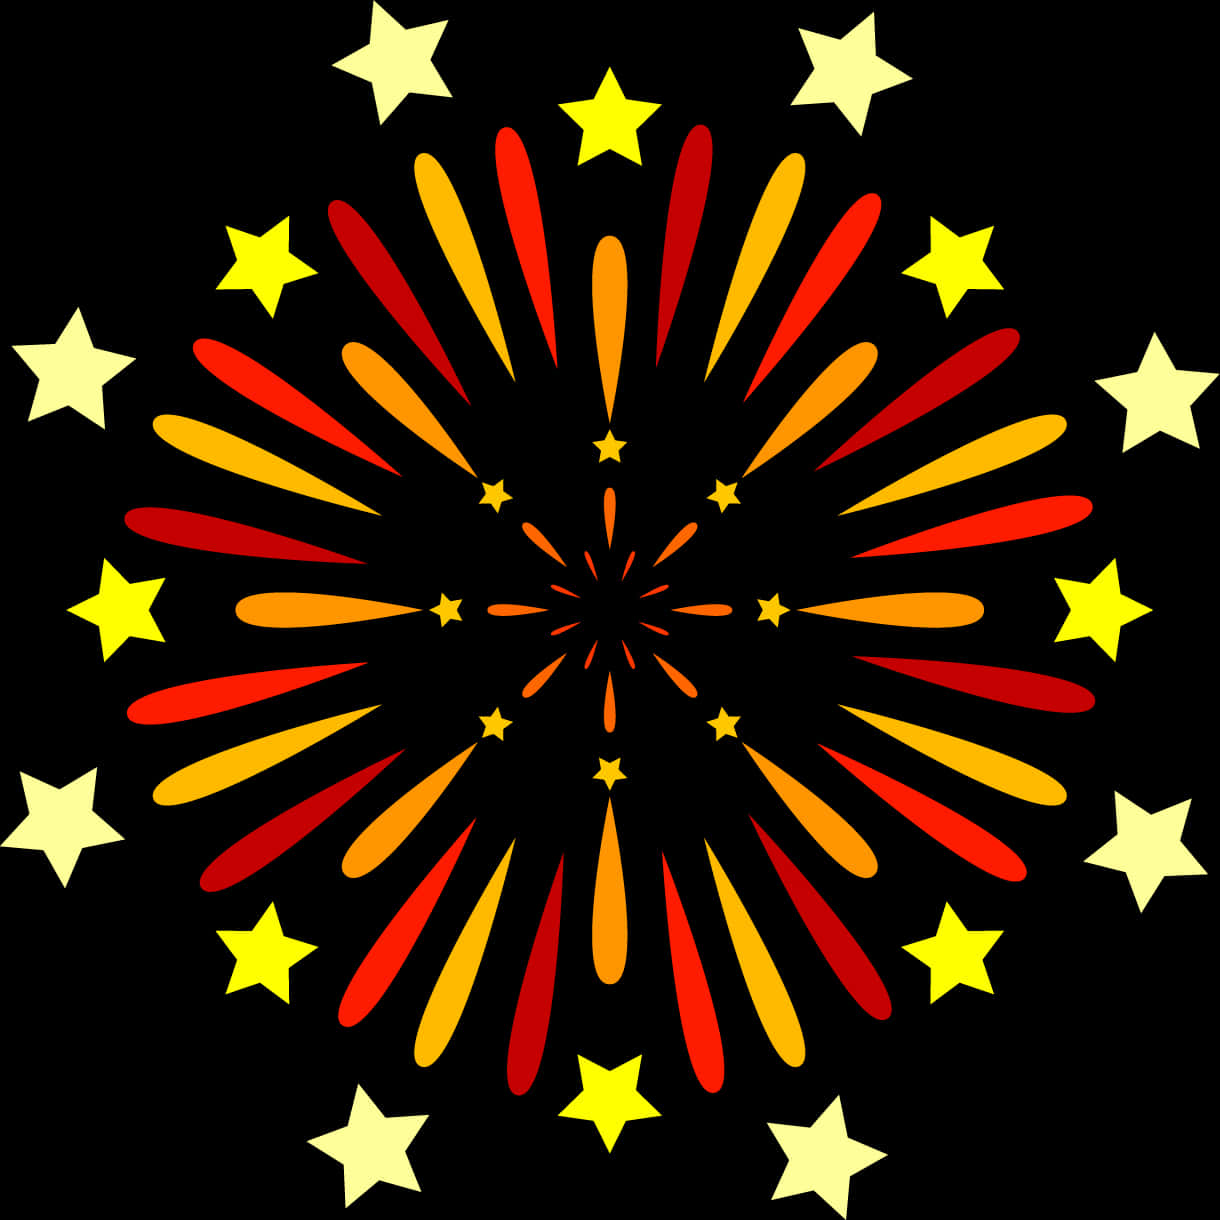 A Firework In The Shape Of A Circle With Stars